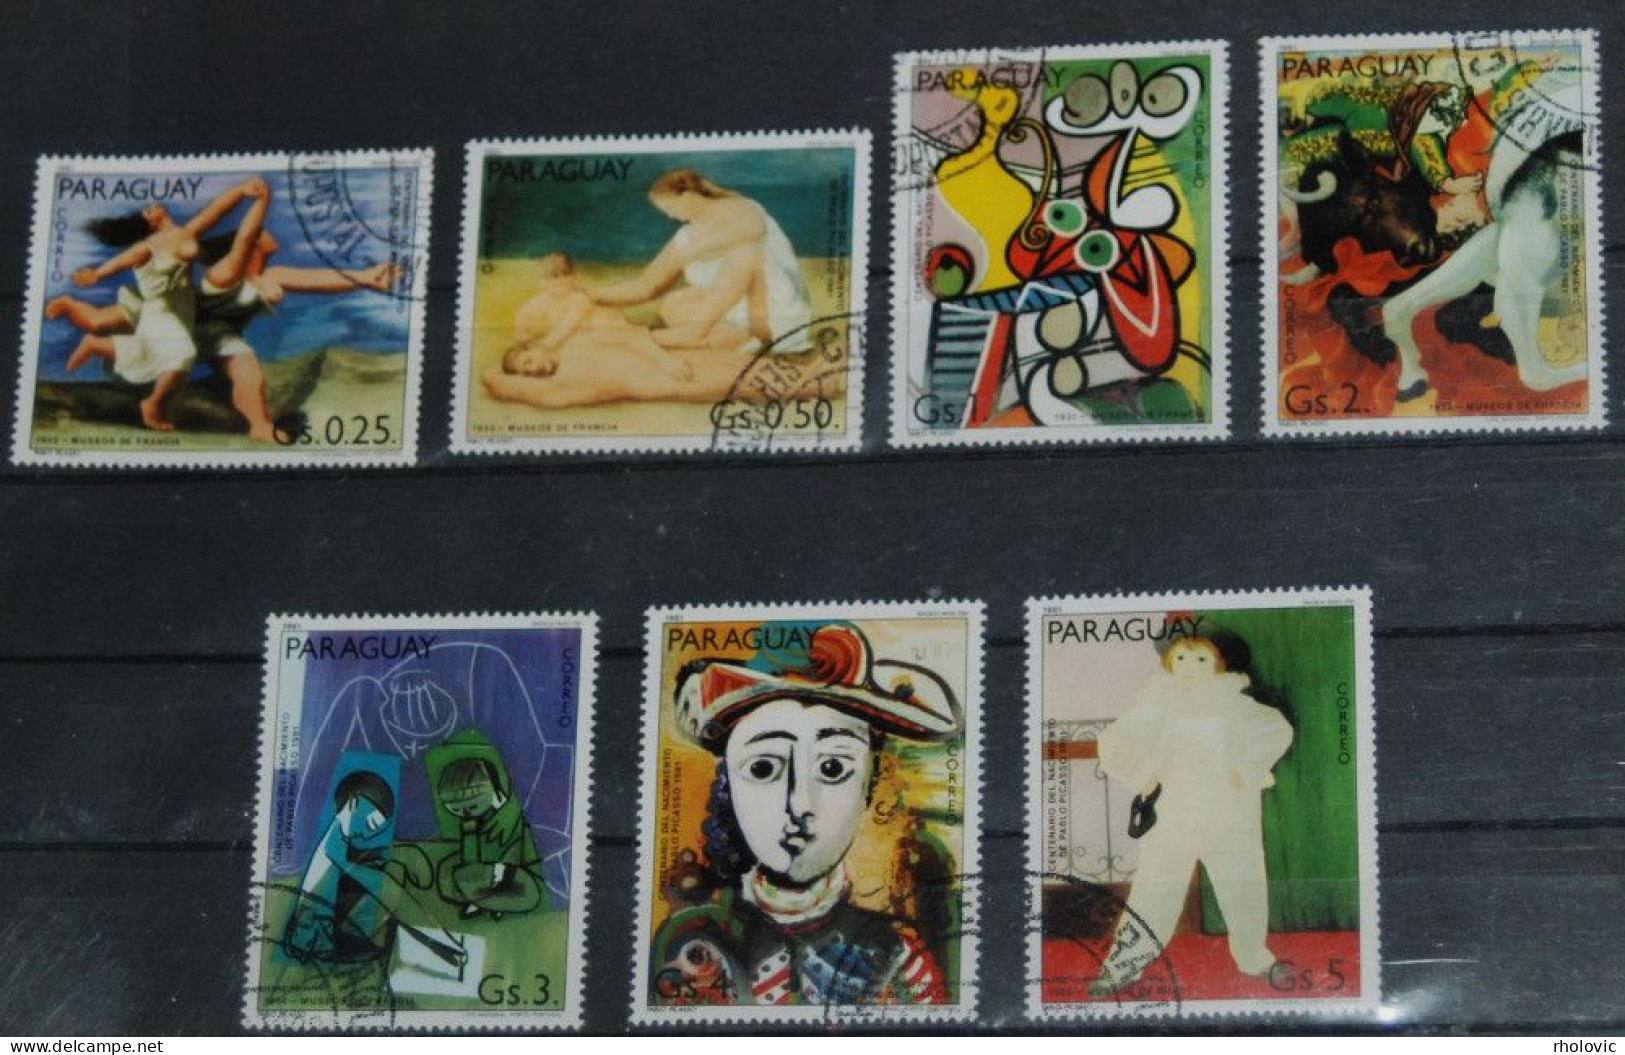 PARAGUAY 1981, Paintings, Picasso, Art, Mi #3436-42, Used - Picasso